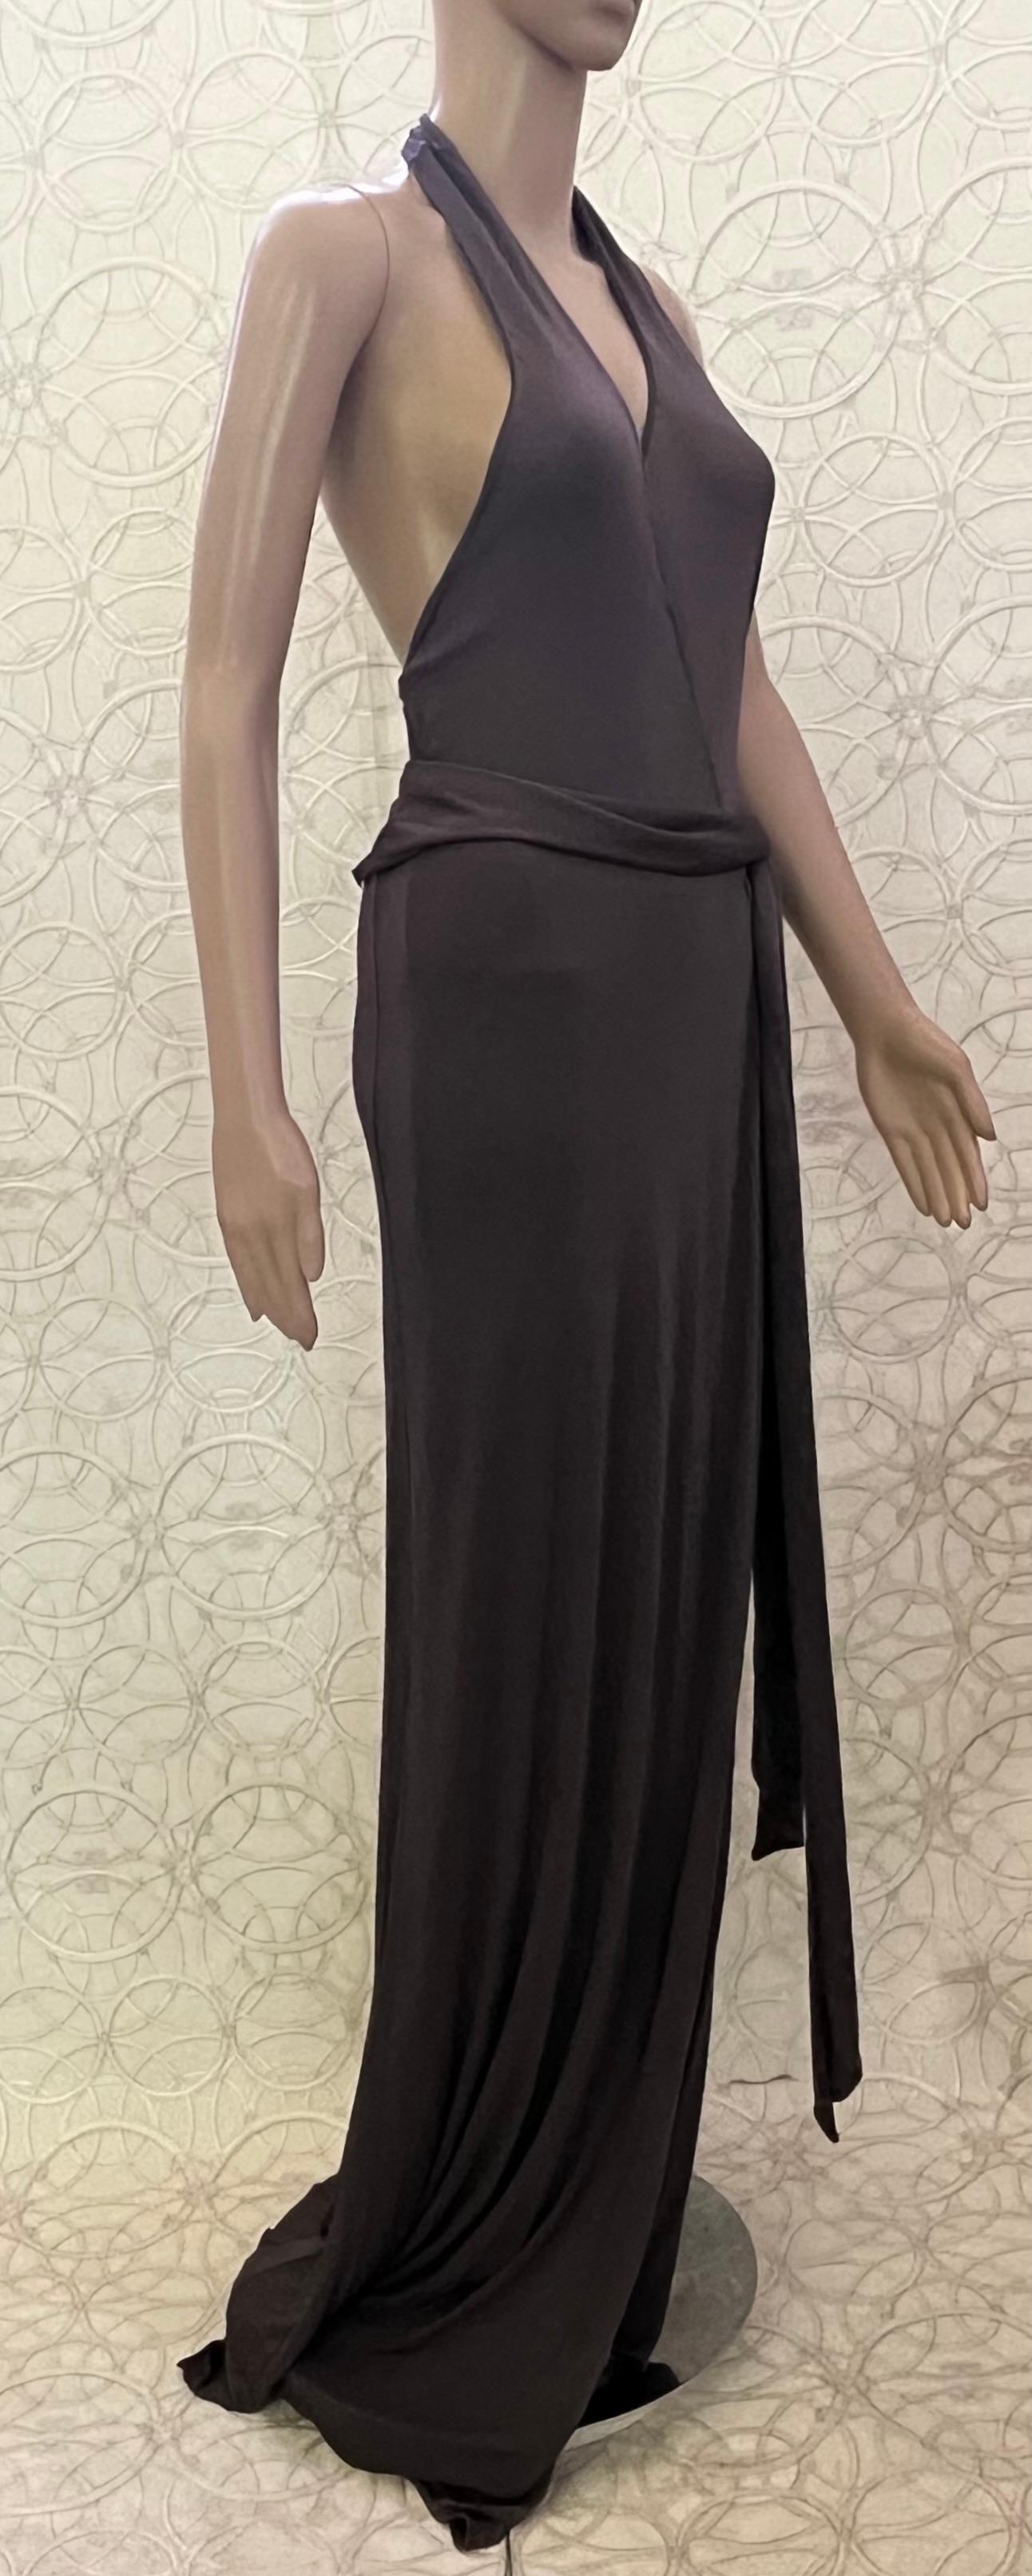 GUCCI by TOM FORD VINTAGE PEWTER WRAP LONG DRESS GOWN Size IT 42 4